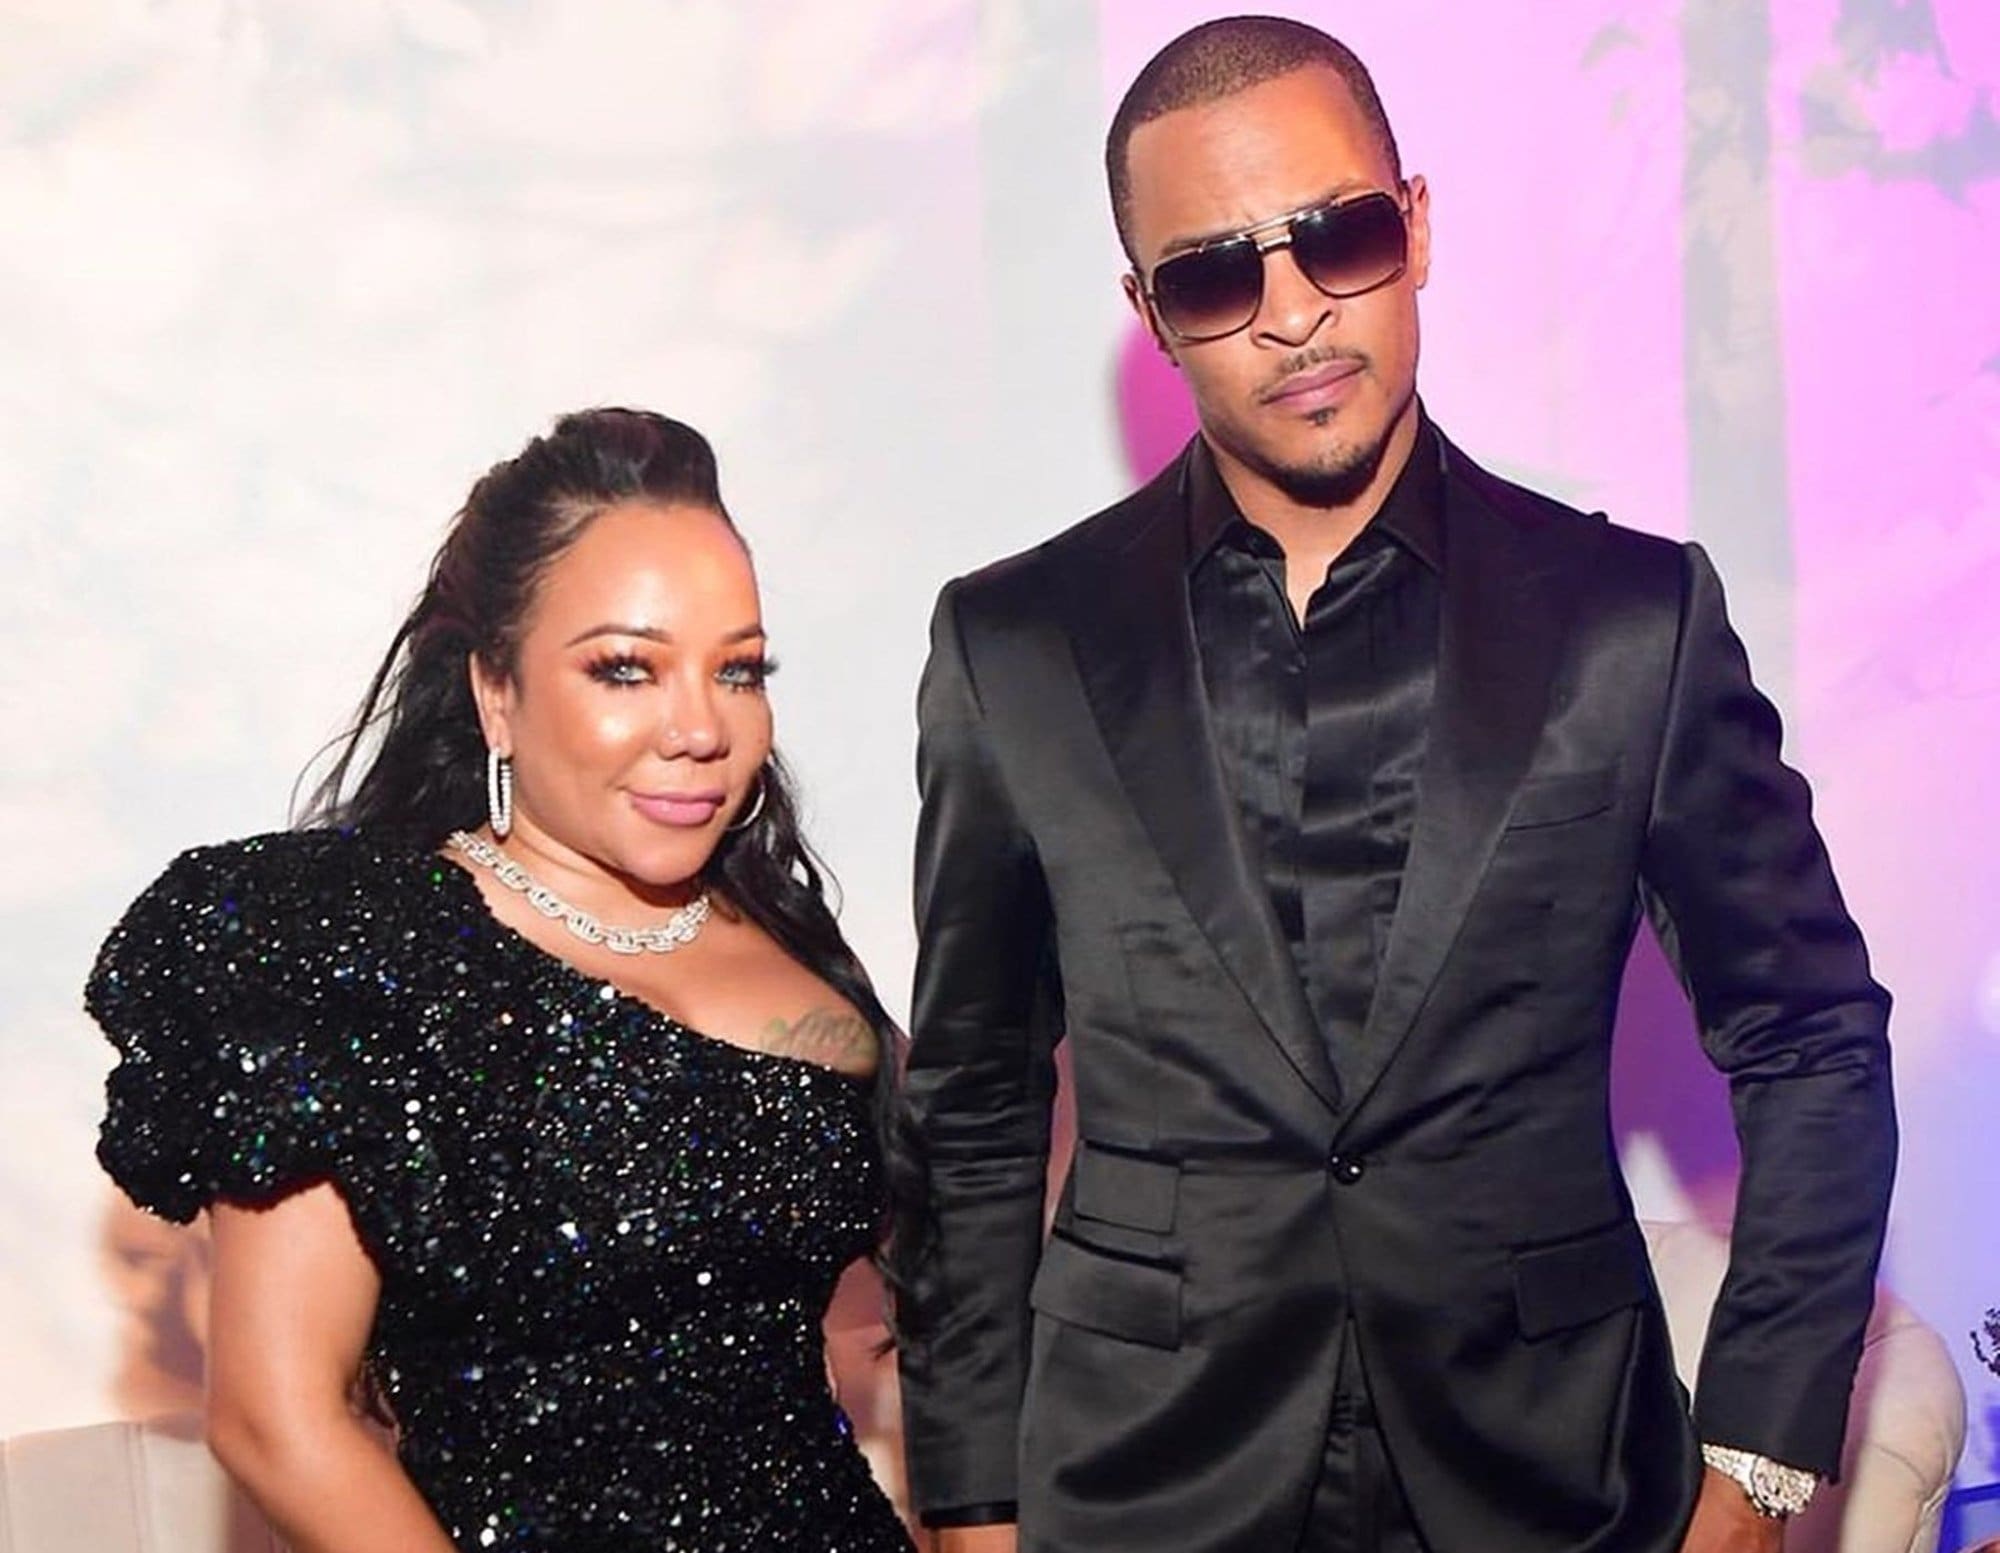 Tiny Harris Floods Her IG Account With Posts Featuring Heiress Harris - See The Most Recent Video